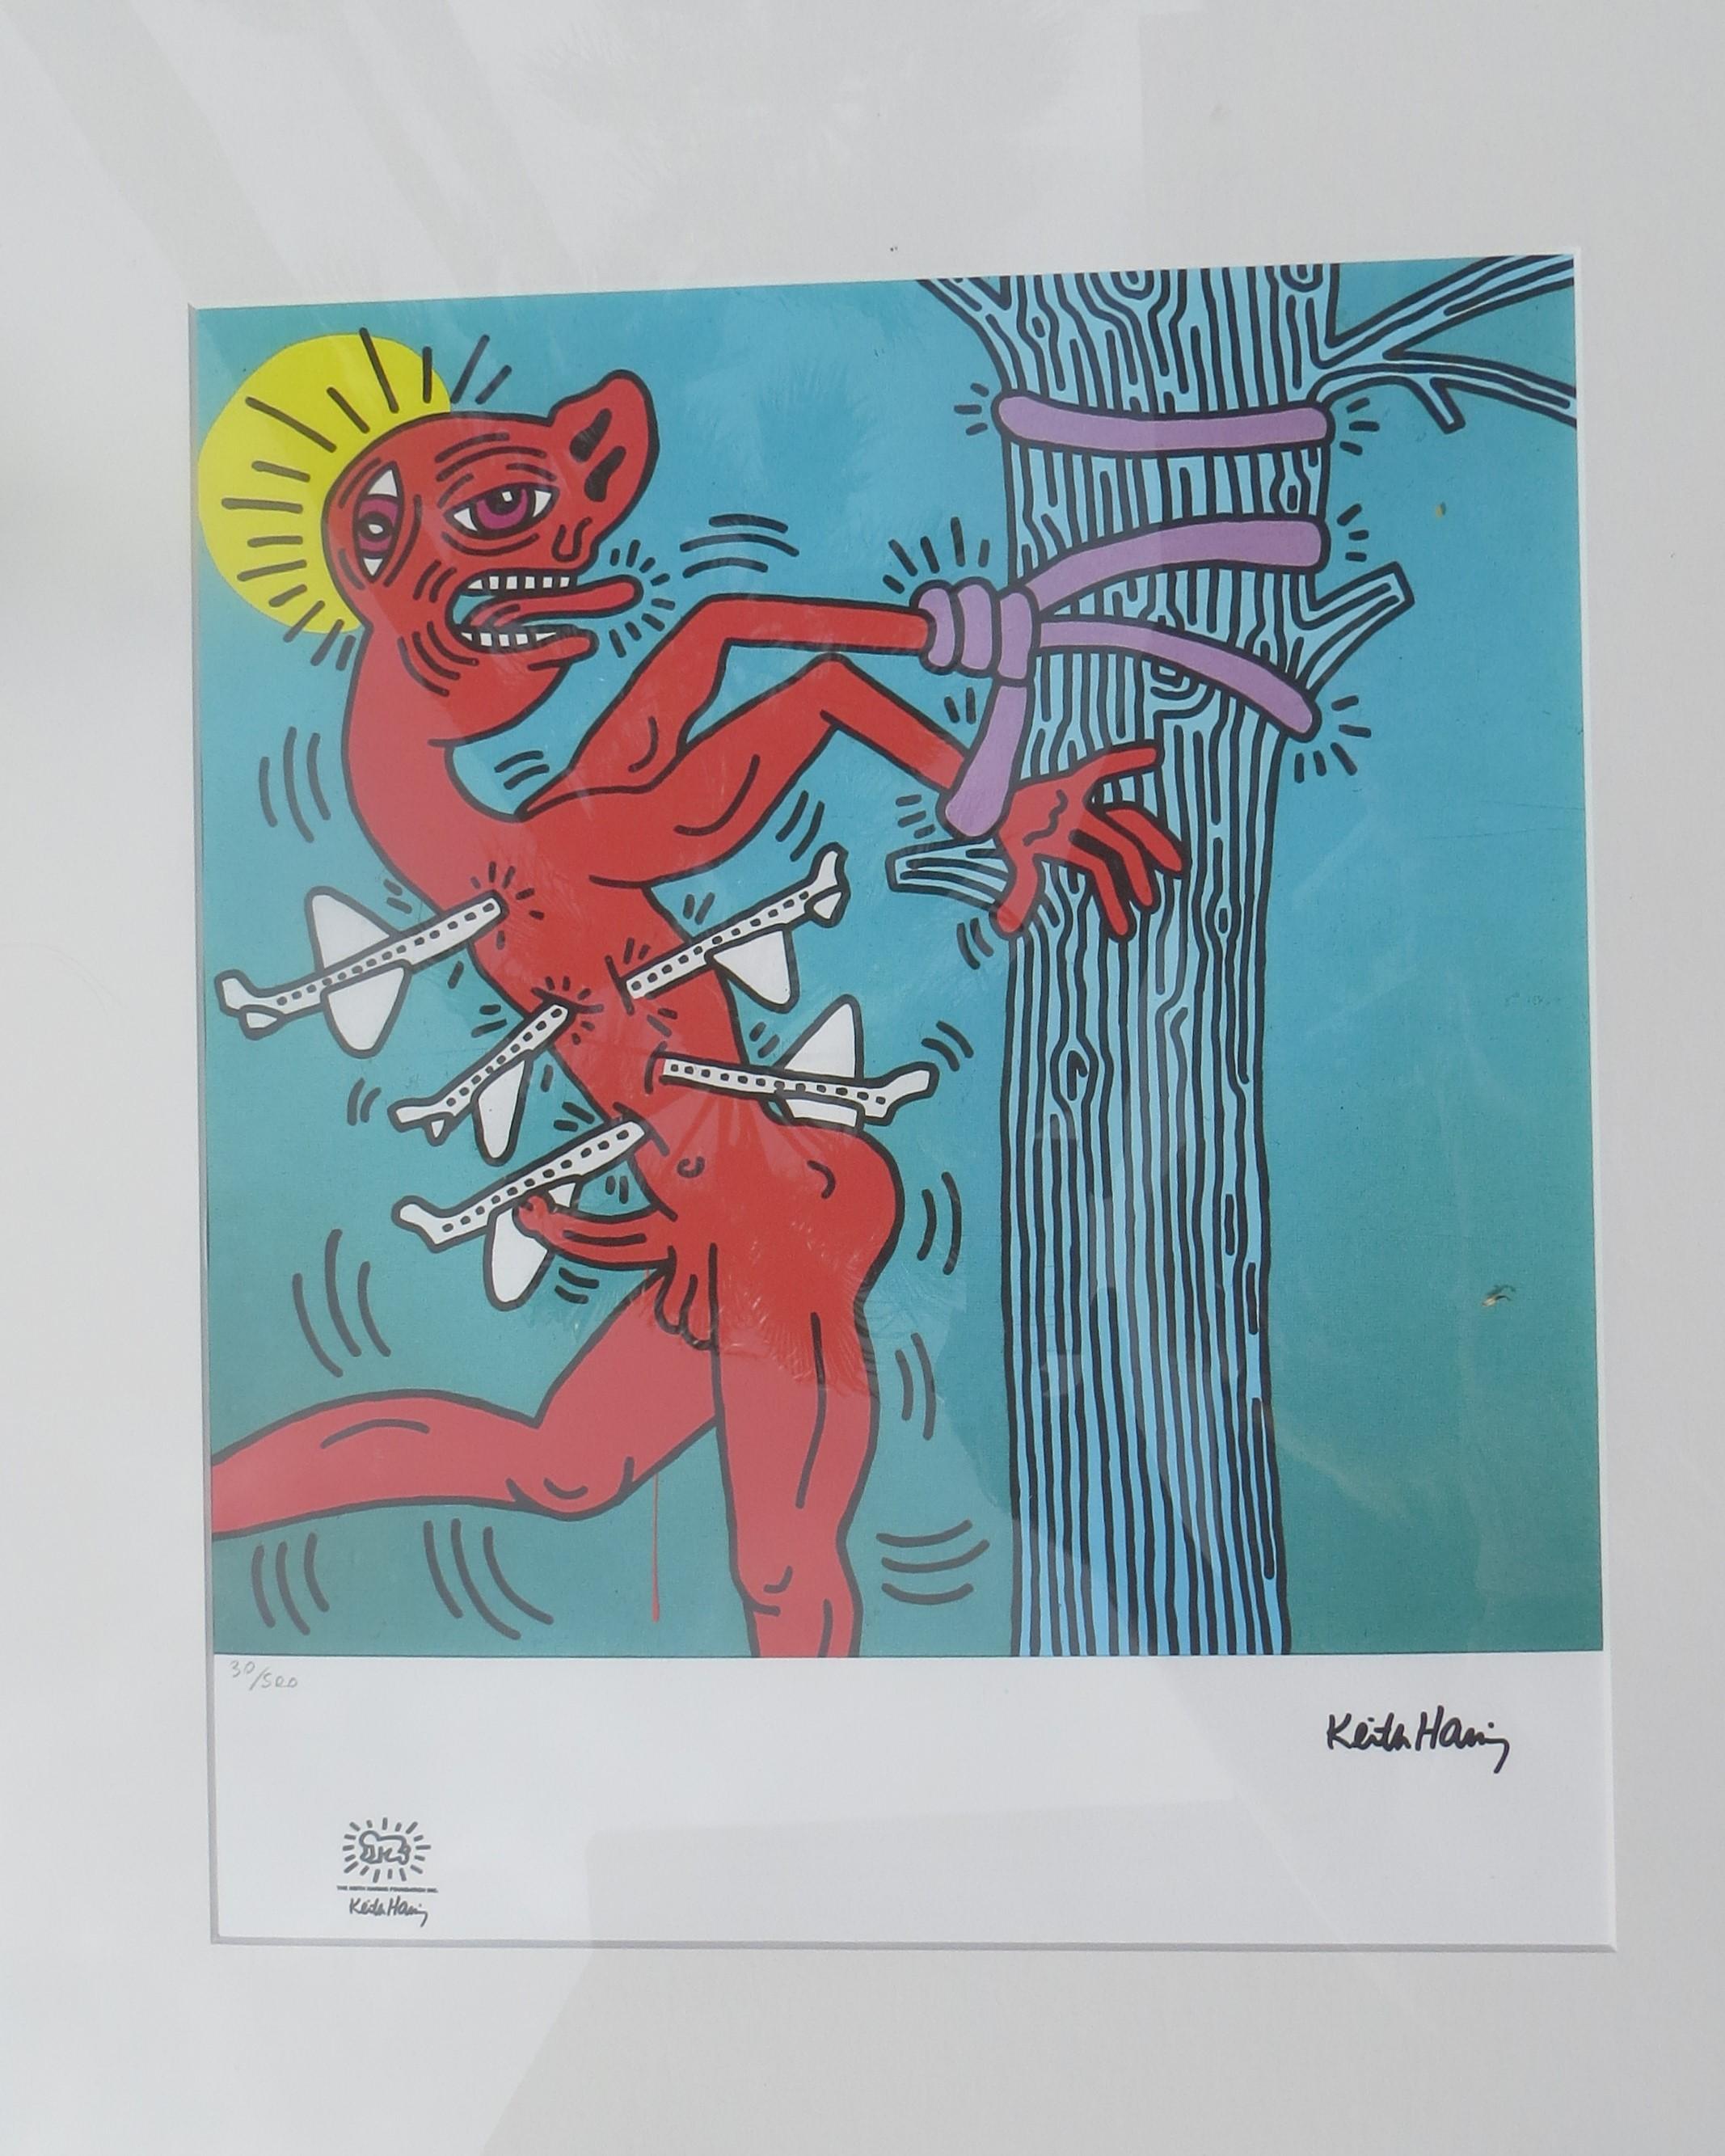 F, Keith Haring, Limited Edition of 500, number 30.
Artwork lithograph prints by Keith Haring Foundation, numbered with embossed stamp.
The image features the world famous American Pop artist and social activist Keith Haring in an iconic signature